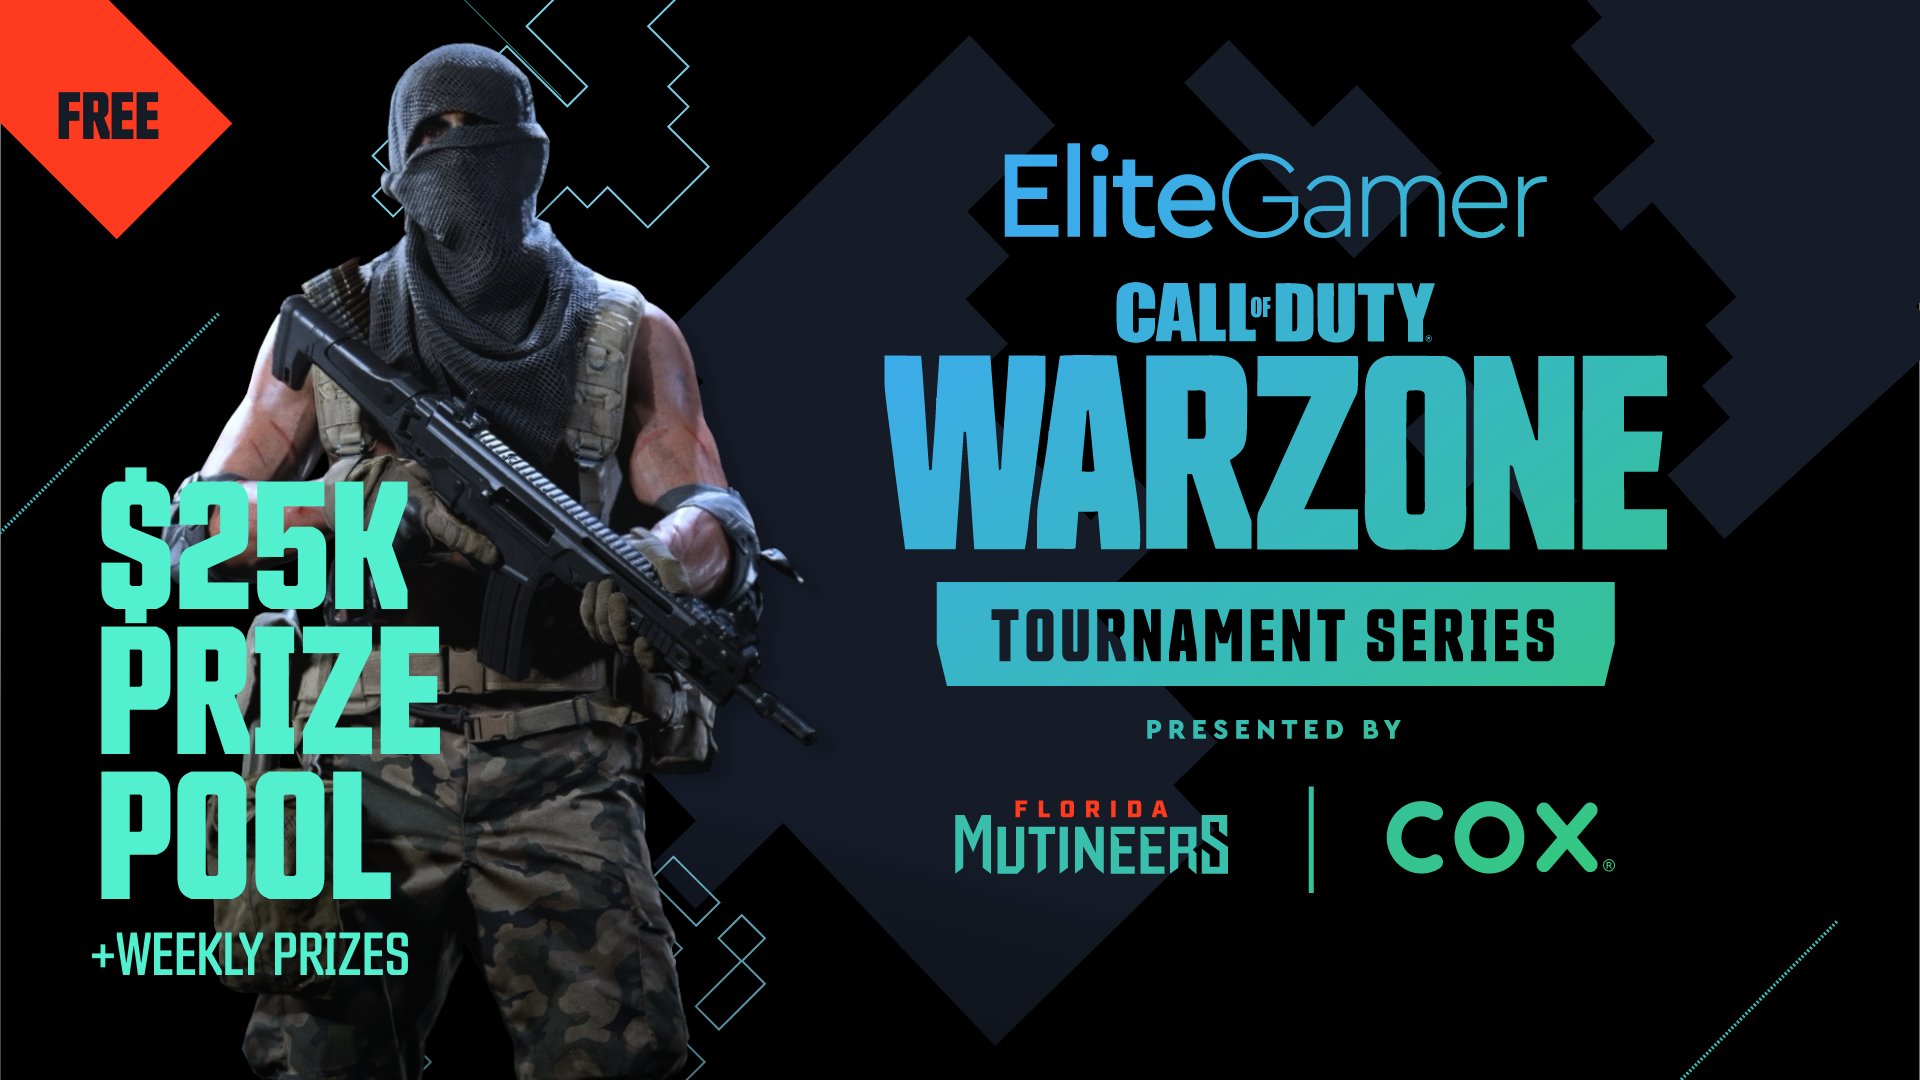 Mutineers Pro-Am $25K Warzone event final placements and recap